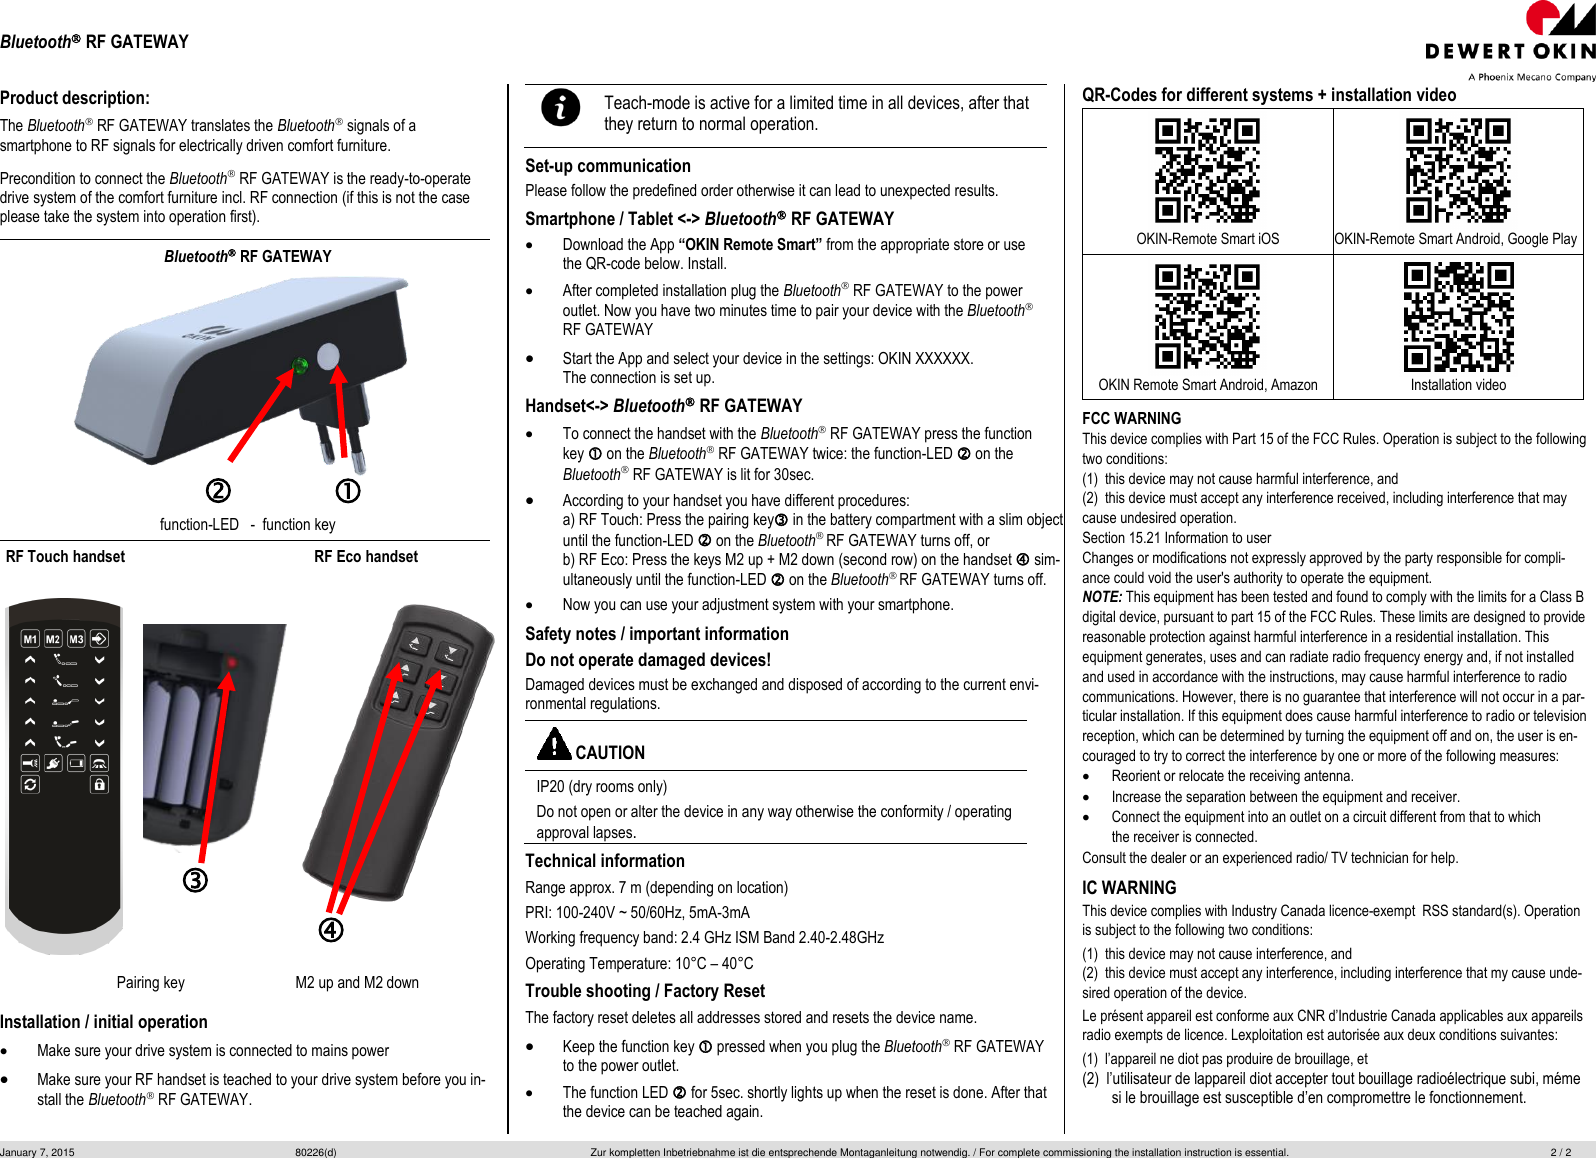 Bluetooth RF GATEWAY January 7, 2015  80226(d)  Zur kompletten Inbetriebnahme ist die entsprechende Montaganleitung notwendig. / For complete commissioning the installation instruction is essential.  2 / 2  Product description: The Bluetooth RF GATEWAY translates the Bluetooth signals of a smartphone to RF signals for electrically driven comfort furniture.  Precondition to connect the Bluetooth RF GATEWAY is the ready-to-operate drive system of the comfort furniture incl. RF connection (if this is not the case please take the system into operation first). Bluetooth RF GATEWAY function-LED   -  function key RF Touch handset      RF Eco handset   Pairing key M2 up and M2 down Installation / initial operation Make sure your drive system is connected to mains power Make sure your RF handset is teached to your drive system before you in-stall the Bluetooth RF GATEWAY. Teach-mode is active for a limited time in all devices, after that they return to normal operation. Set-up communication Please follow the predefined order otherwise it can lead to unexpected results. Smartphone / Tablet &lt;-&gt; Bluetooth RF GATEWAY Download the App “OKIN Remote Smart” from the appropriate store or usethe QR-code below. Install. After completed installation plug the Bluetooth RF GATEWAY to the power outlet. Now you have two minutes time to pair your device with the Bluetooth RF GATEWAY Start the App and select your device in the settings: OKIN XXXXXX. The connection is set up.Handset&lt;-&gt; Bluetooth RF GATEWAY To connect the handset with the Bluetooth RF GATEWAY press the functionkey  on the Bluetooth RF GATEWAY twice: the function-LED  on theBluetooth RF GATEWAY is lit for 30sec. According to your handset you have different procedures: a) RF Touch: Press the pairing key in the battery compartment with a slim object until the function-LED  on the Bluetooth RF GATEWAY turns off, or  b) RF Eco: Press the keys M2 up + M2 down (second row) on the handset  sim-ultaneously until the function-LED  on the Bluetooth RF GATEWAY turns off. Now you can use your adjustment system with your smartphone. Safety notes / important information Do not operate damaged devices!  Damaged devices must be exchanged and disposed of according to the current envi-ronmental regulations.  CAUTION IP20 (dry rooms only) Do not open or alter the device in any way otherwise the conformity / operating approval lapses.  Technical information Range approx. 7 m (depending on location)  PRI: 100-240V ~ 50/60Hz, 5mA-3mA Working frequency band: 2.4 GHz ISM Band 2.40-2.48GHz Operating Temperature: 10°C – 40°CTrouble shooting / Factory Reset The factory reset deletes all addresses stored and resets the device name.  Keep the function key  pressed when you plug the Bluetooth RF GATEWAYto the power outlet. The function LED  for 5sec. shortly lights up when the reset is done. After that the device can be teached again. QR-Codes for different systems + installation video OKIN-Remote Smart iOS OKIN-Remote Smart Android, Google Play OKIN Remote Smart Android, Amazon Installation video FCC WARNING This device complies with Part 15 of the FCC Rules. Operation is subject to the following two conditions: (1)  this device may not cause harmful interference, and (2)  this device must accept any interference received, including interference that may cause undesired operation. Section 15.21 Information to user Changes or modifications not expressly approved by the party responsible for compli-ance could void the user&apos;s authority to operate the equipment. NOTE: This equipment has been tested and found to comply with the limits for a Class B digital device, pursuant to part 15 of the FCC Rules. These limits are designed to provide reasonable protection against harmful interference in a residential installation. This equipment generates, uses and can radiate radio frequency energy and, if not installed and used in accordance with the instructions, may cause harmful interference to radio communications. However, there is no guarantee that interference will not occur in a par-ticular installation. If this equipment does cause harmful interference to radio or television reception, which can be determined by turning the equipment off and on, the user is en-couraged to try to correct the interference by one or more of the following measures: Reorient or relocate the receiving antenna.Increase the separation between the equipment and receiver.Connect the equipment into an outlet on a circuit different from that to whichthe receiver is connected. Consult the dealer or an experienced radio/ TV technician for help. IC WARNING This device complies with Industry Canada licence-exempt  RSS standard(s). Operation is subject to the following two conditions: (1)  this device may not cause interference, and (2)  this device must accept any interference, including interference that my cause unde-sired operation of the device. Le présent appareil est conforme aux CNR d’Industrie Canada applicables aux appareils radio exempts de licence. Lexploitation est autorisée aux deux conditions suivantes: (1)  l’appareil ne diot pas produire de brouillage, et (2)  l’utilisateur de lappareil diot accepter tout bouillage radioélectrique subi, méme si le brouillage est susceptible d’en compromettre le fonctionnement. 